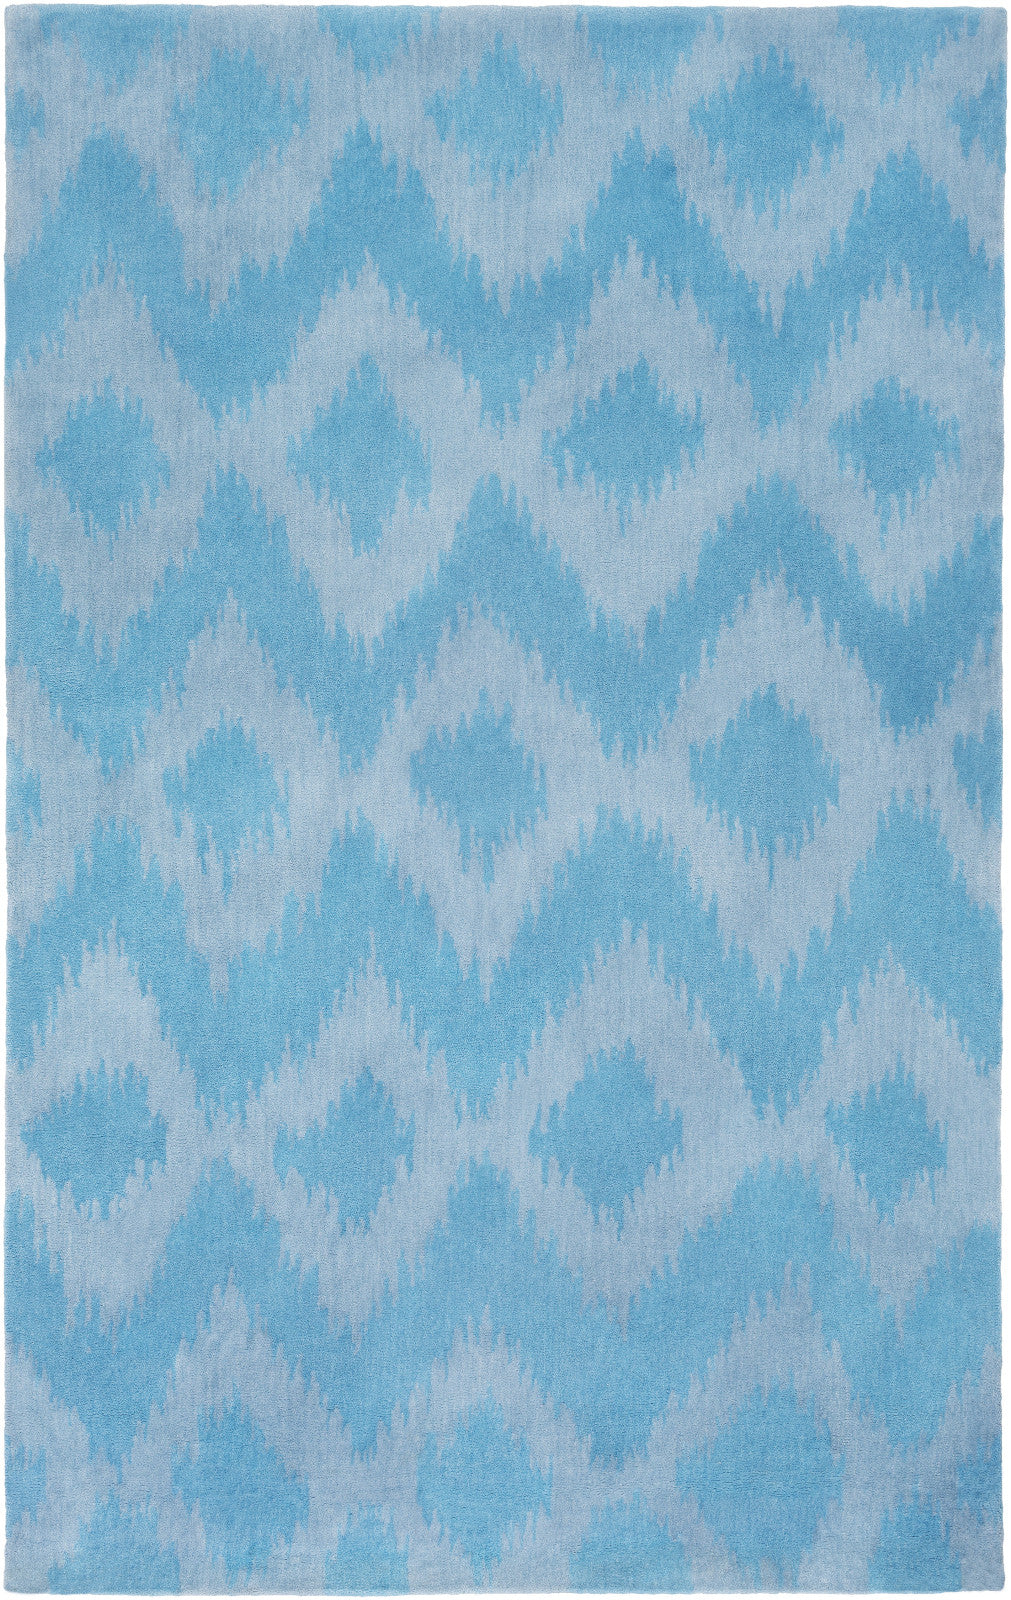 Leap Frog LPF-8011 Blue Area Rug by Surya